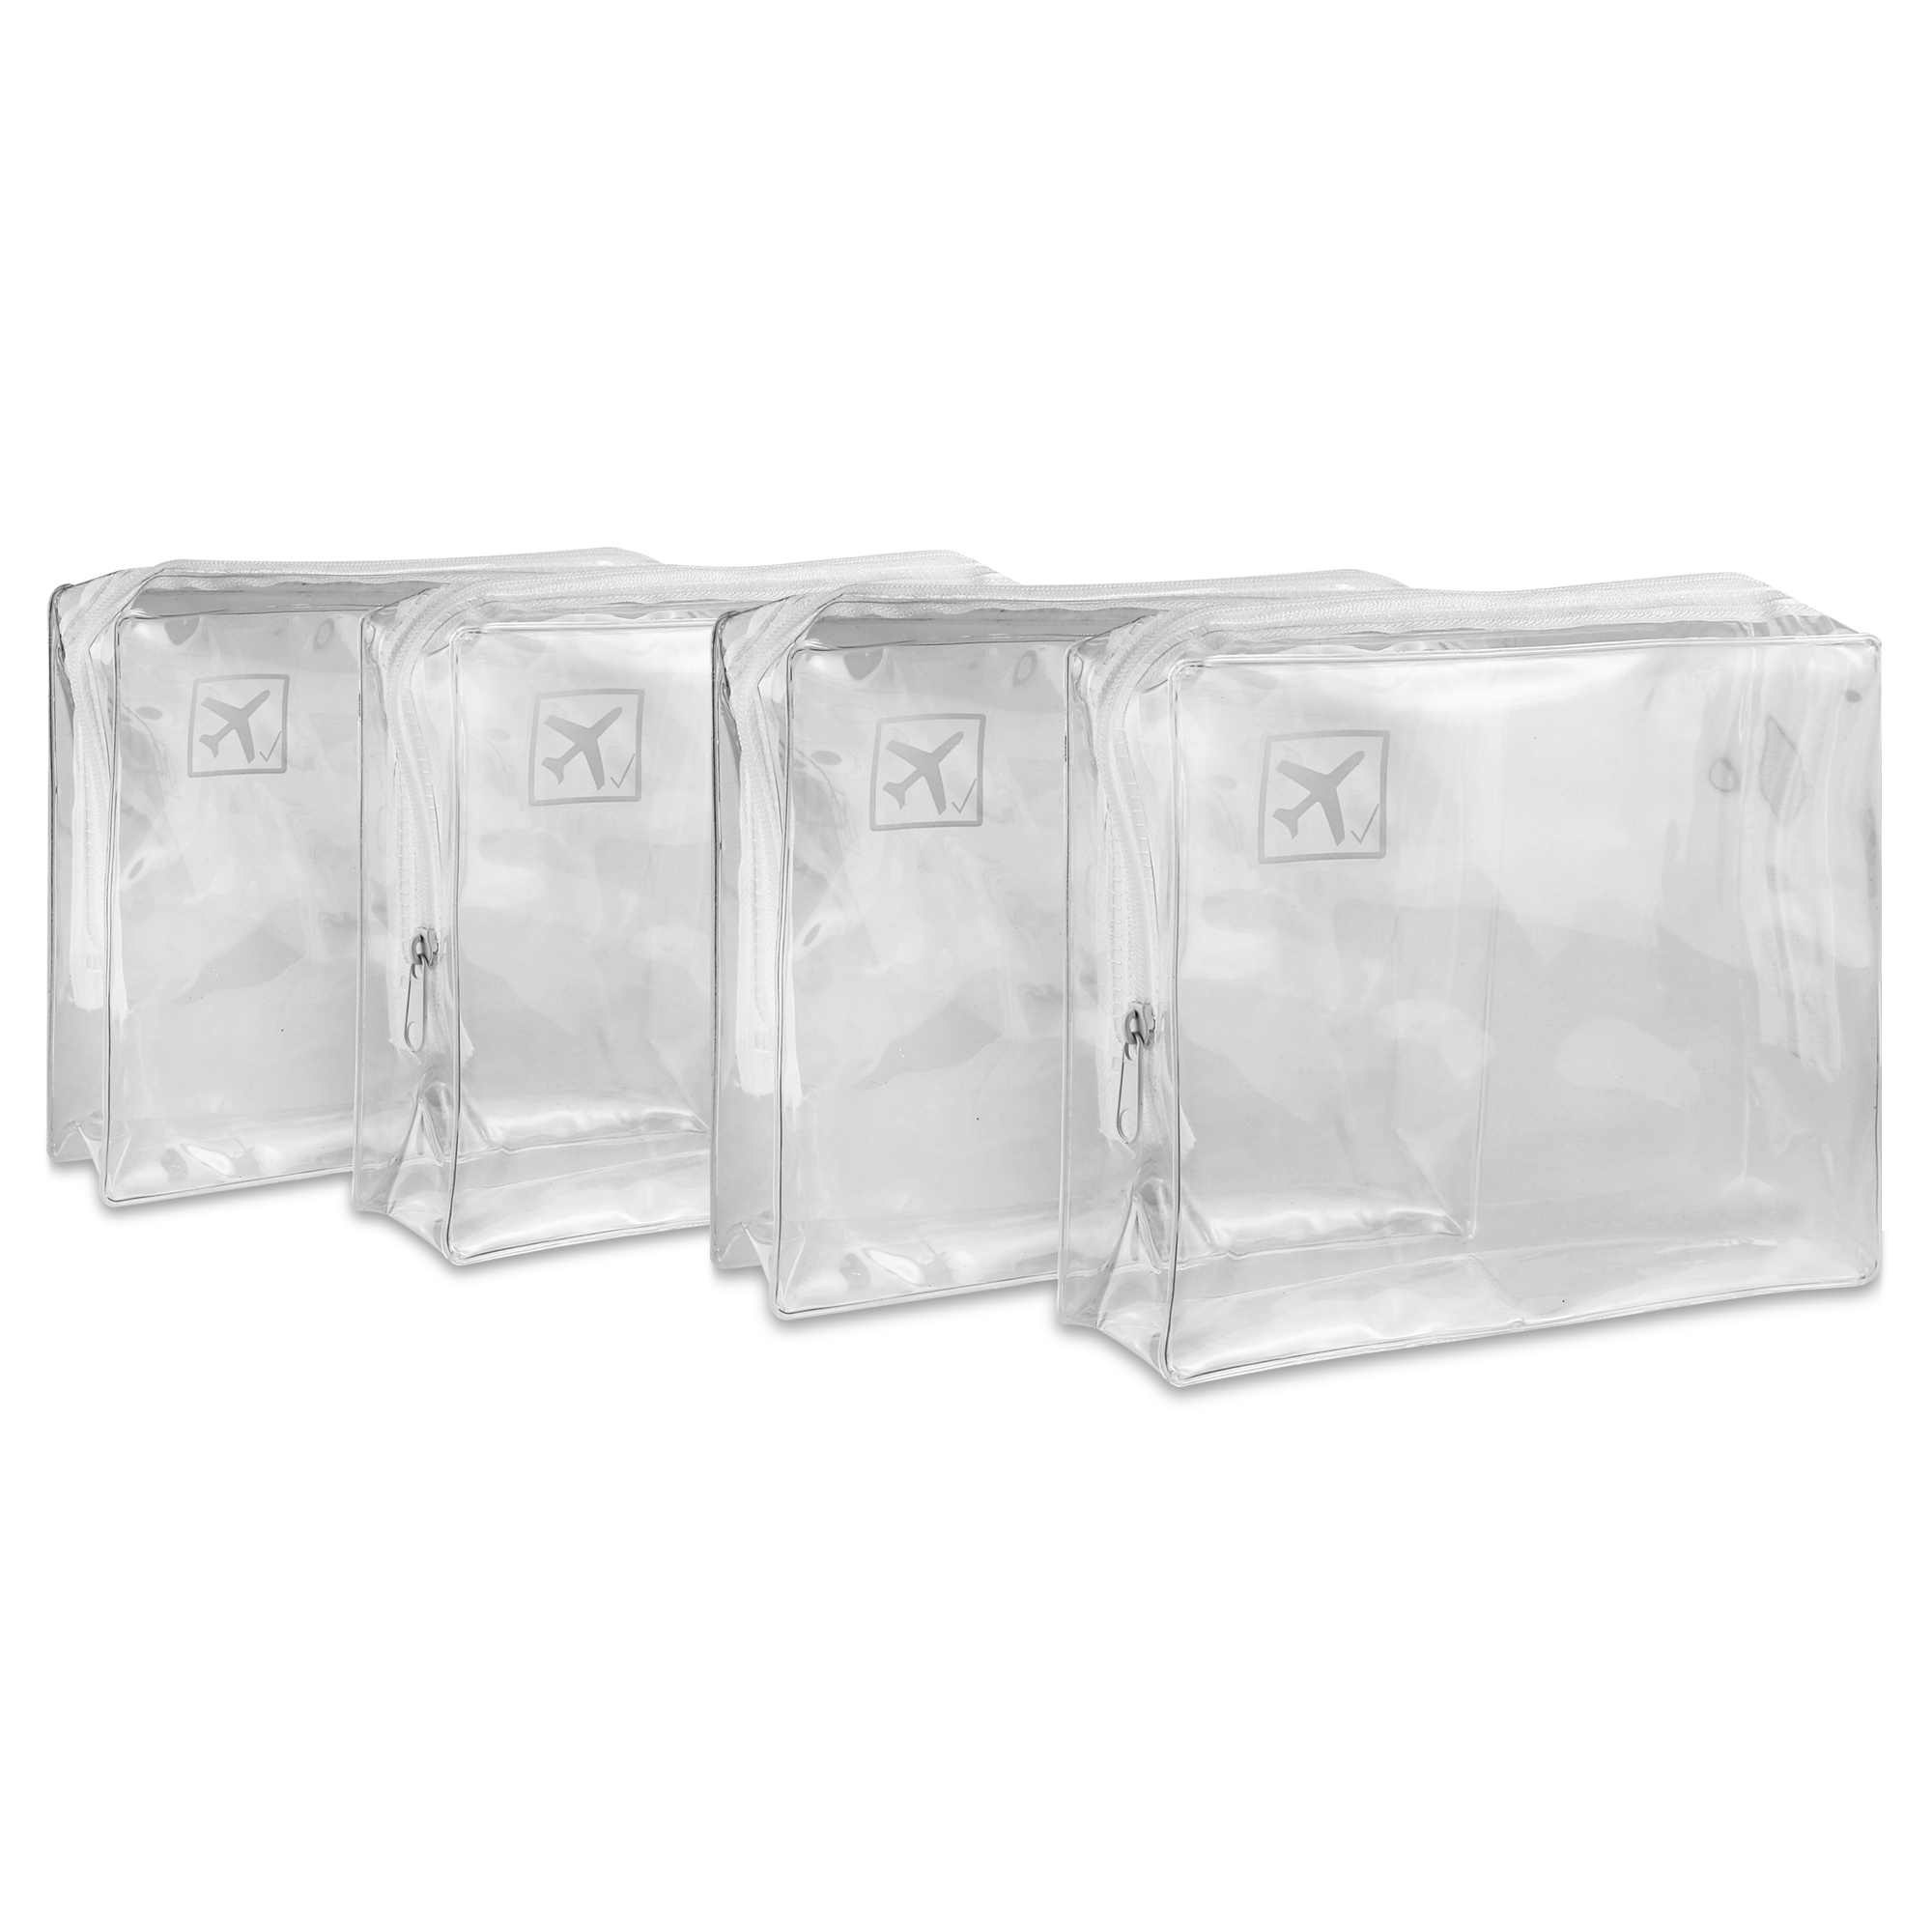 4 X Toiletry Airport Security Holiday Travel Bags - Clear Plastic ...